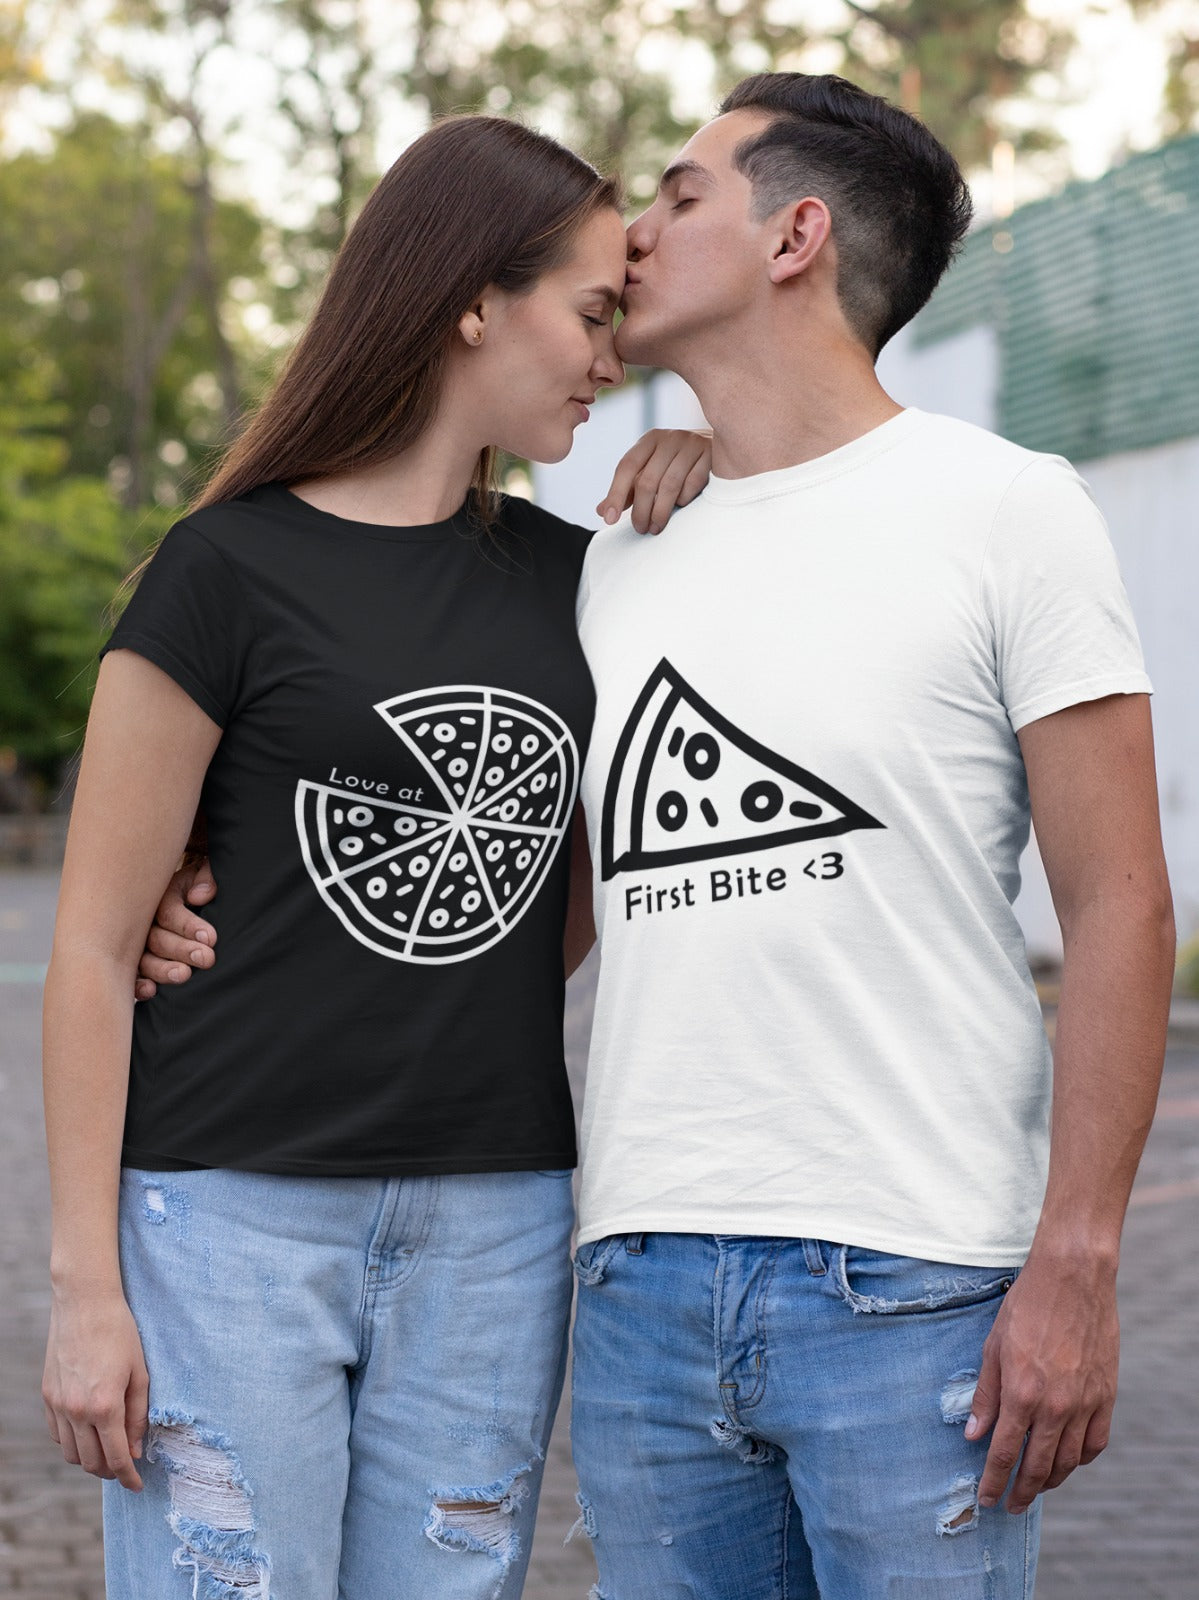 Our couple t-shirt set featuring pizza designs is the perfect way to show off your love for each other and your favorite food. Made from high-quality materials, these t-shirts are comfortable and versatile, suitable for any occasion. Order yours today and let everyone know that you and your significant other are the perfect match, just like pizza and love!